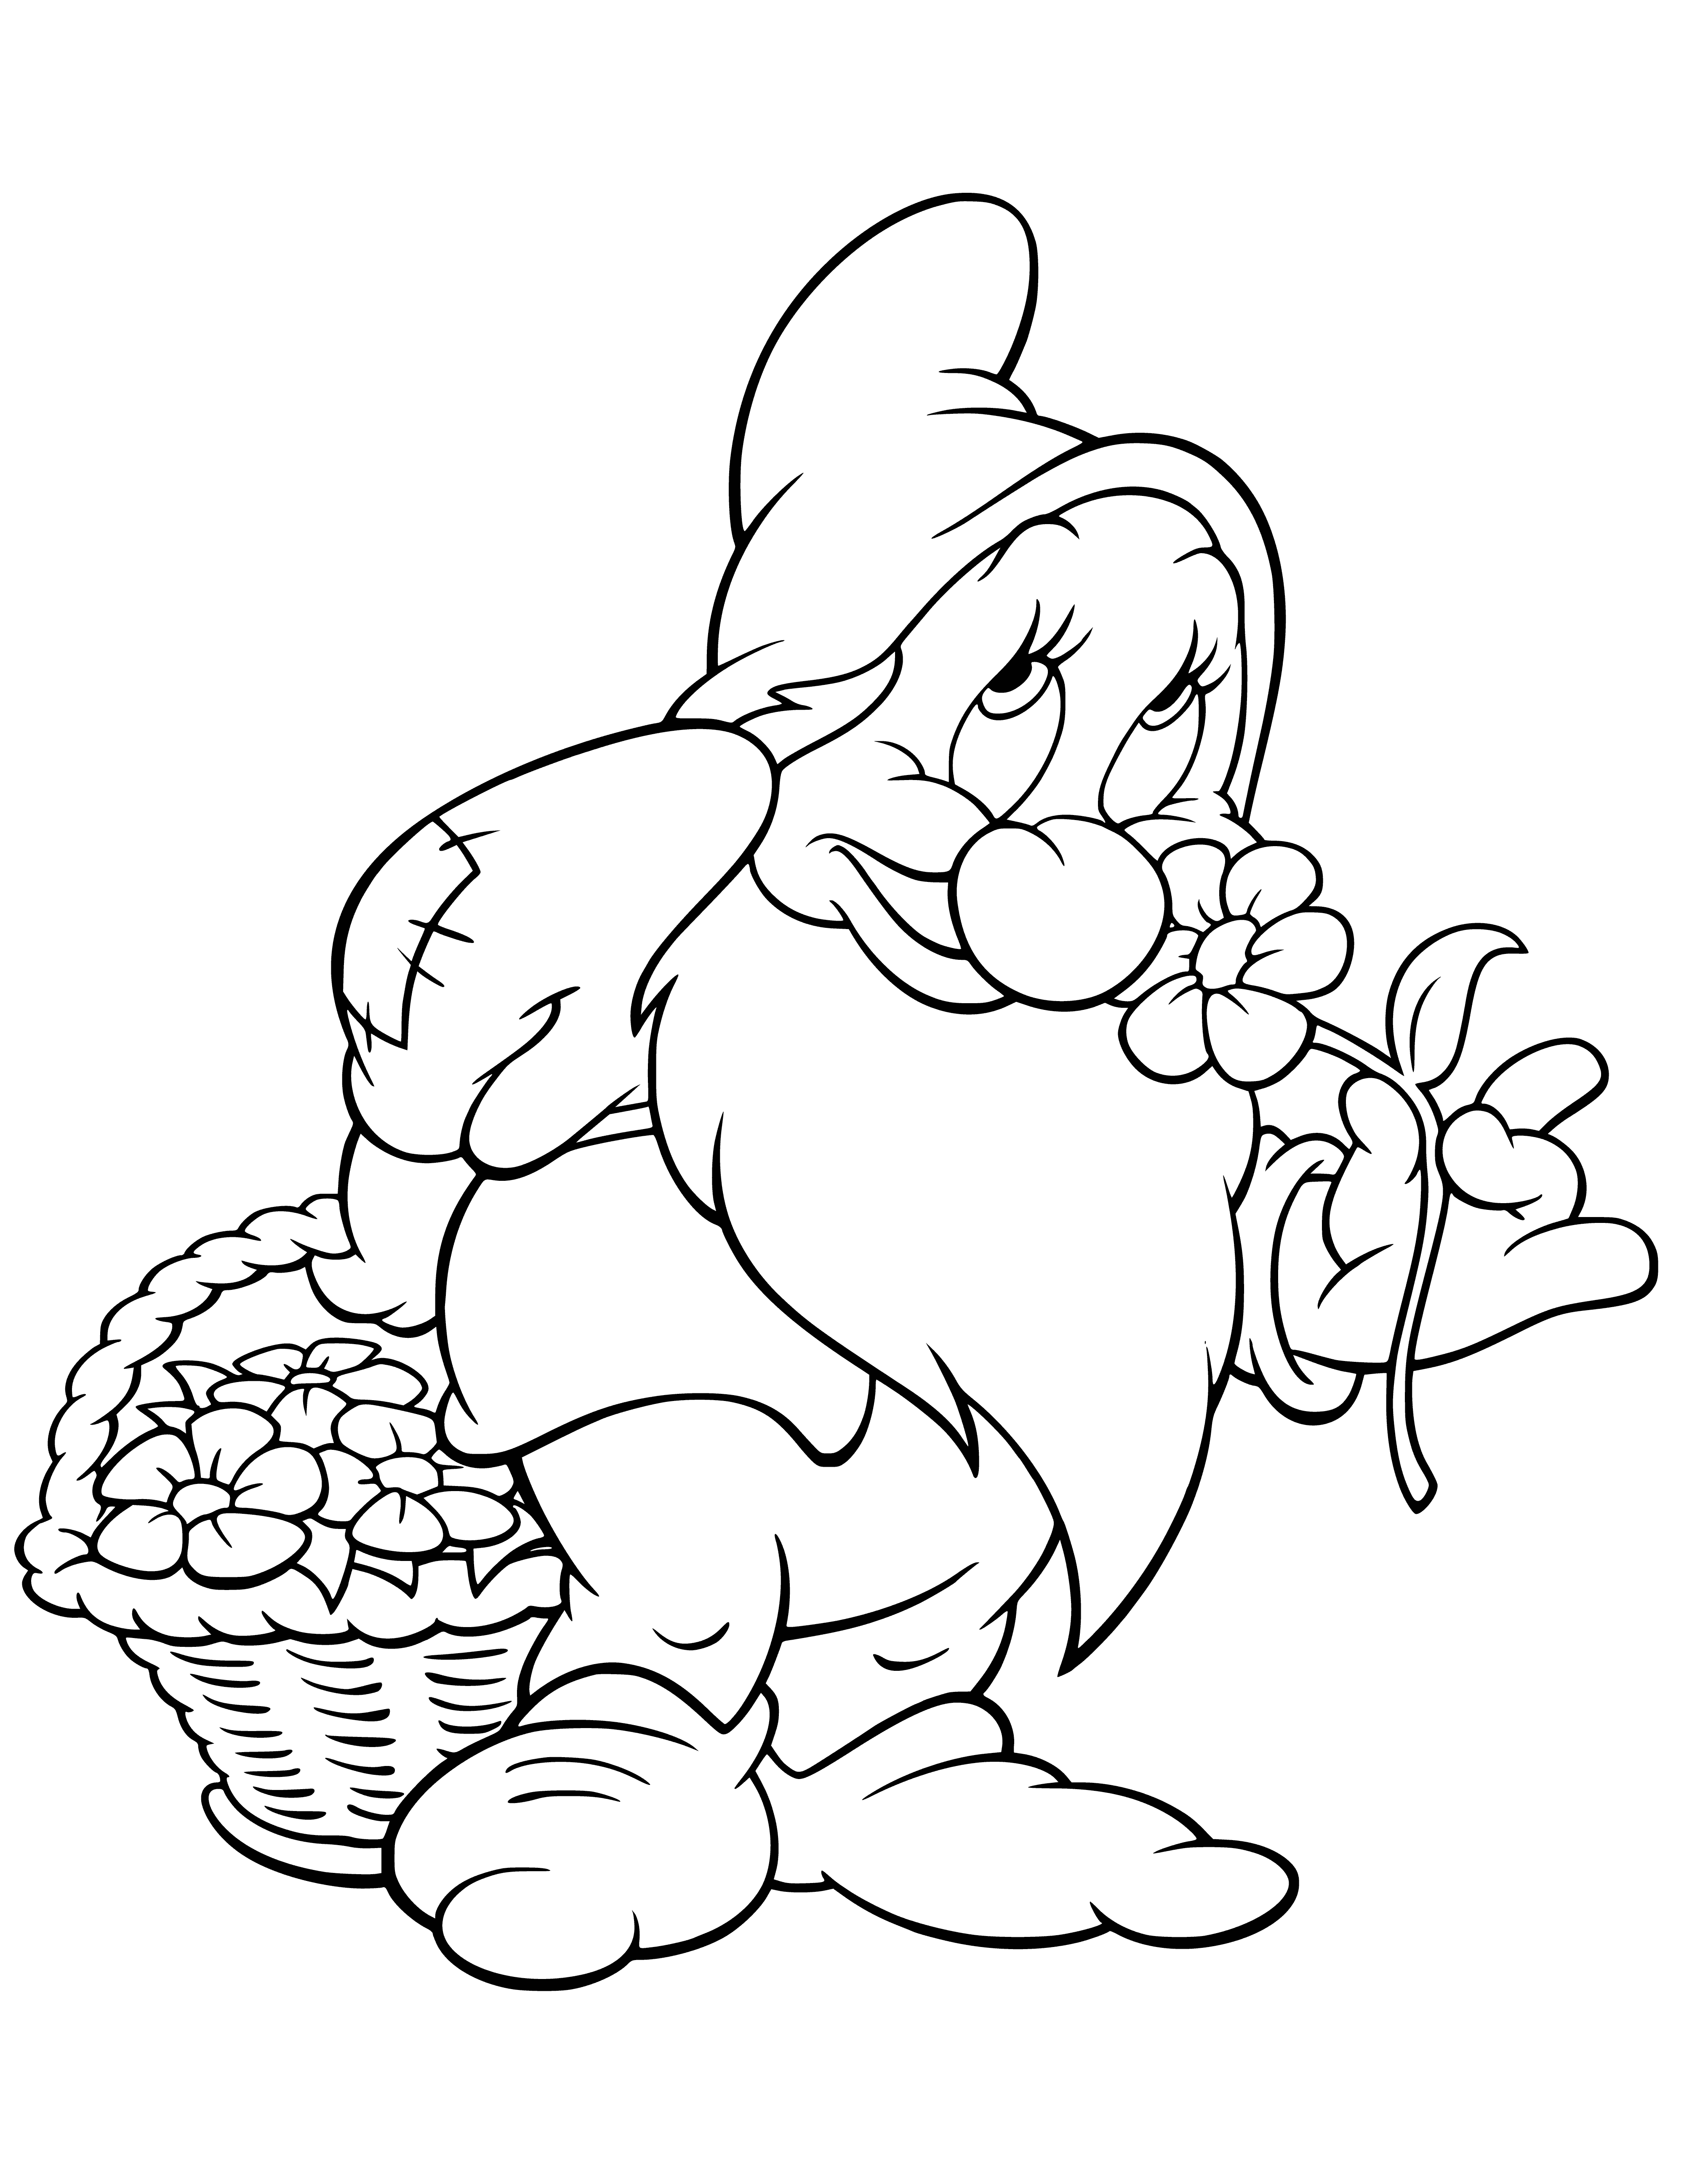 Dwarf Quiet with a basket of flowers coloring page